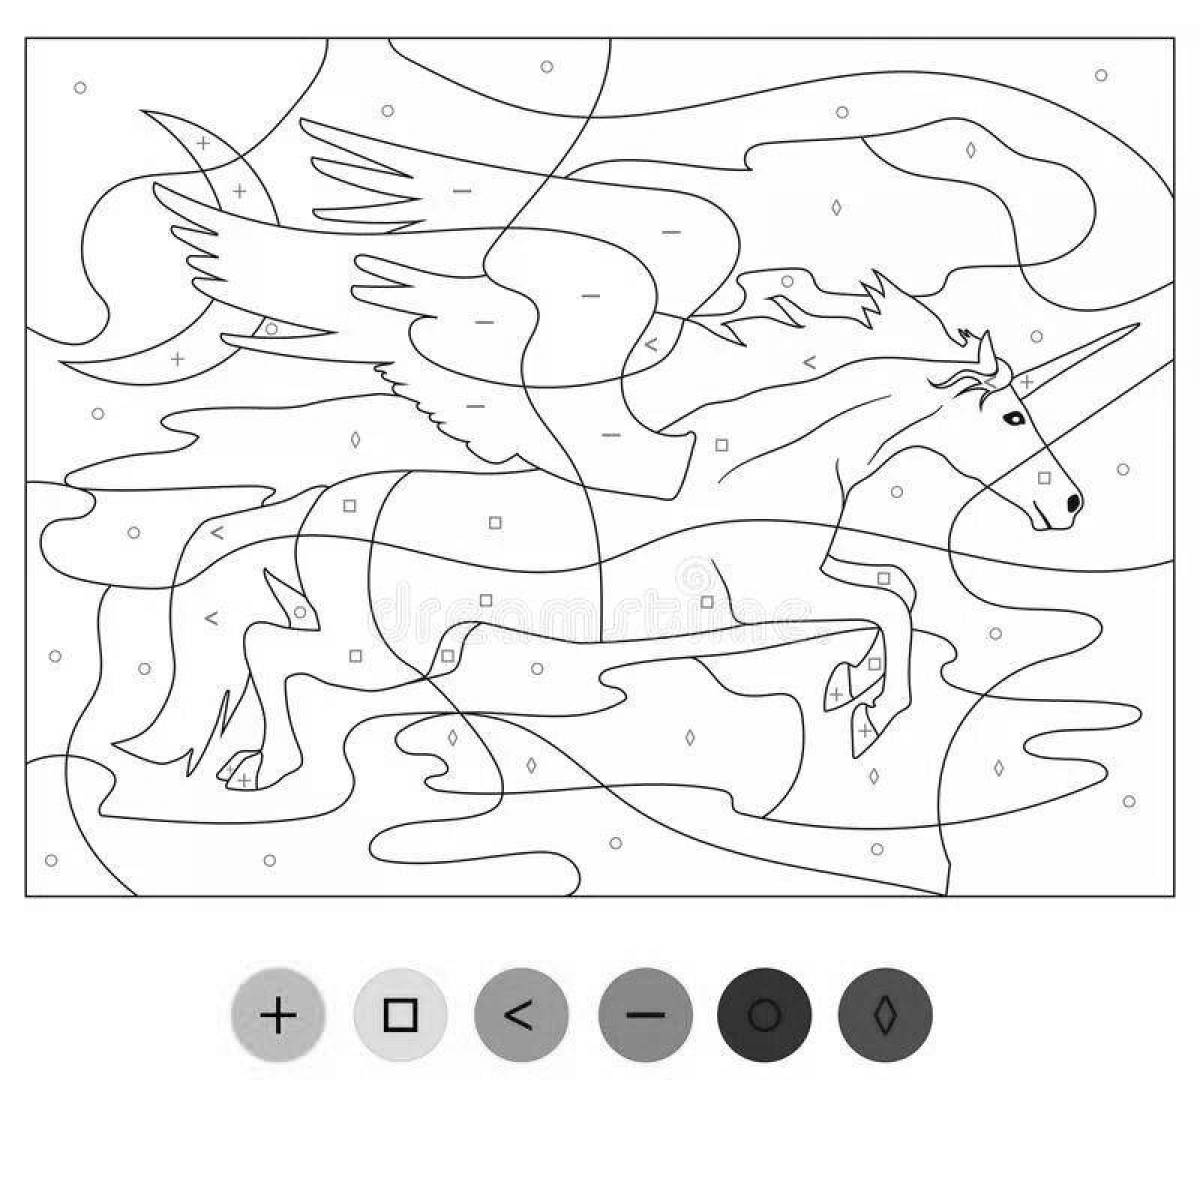 Wonderful unicorn coloring by numbers